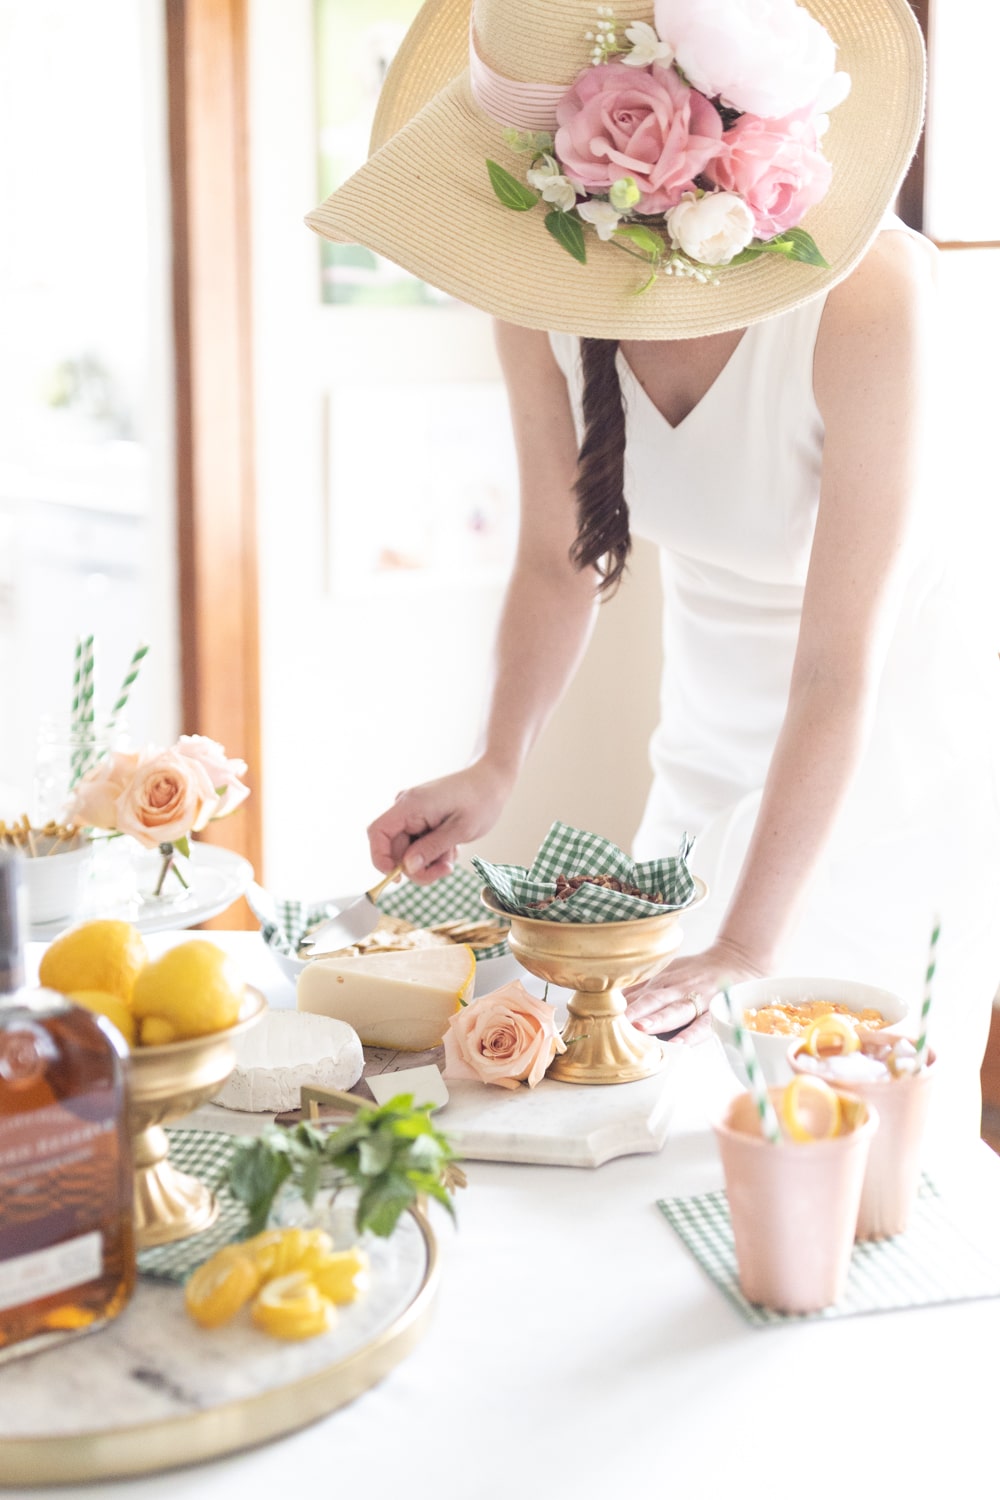 Blogger Stephanie Ziajka shares ideas for Kentucky Derby party food on Diary of a Debutante